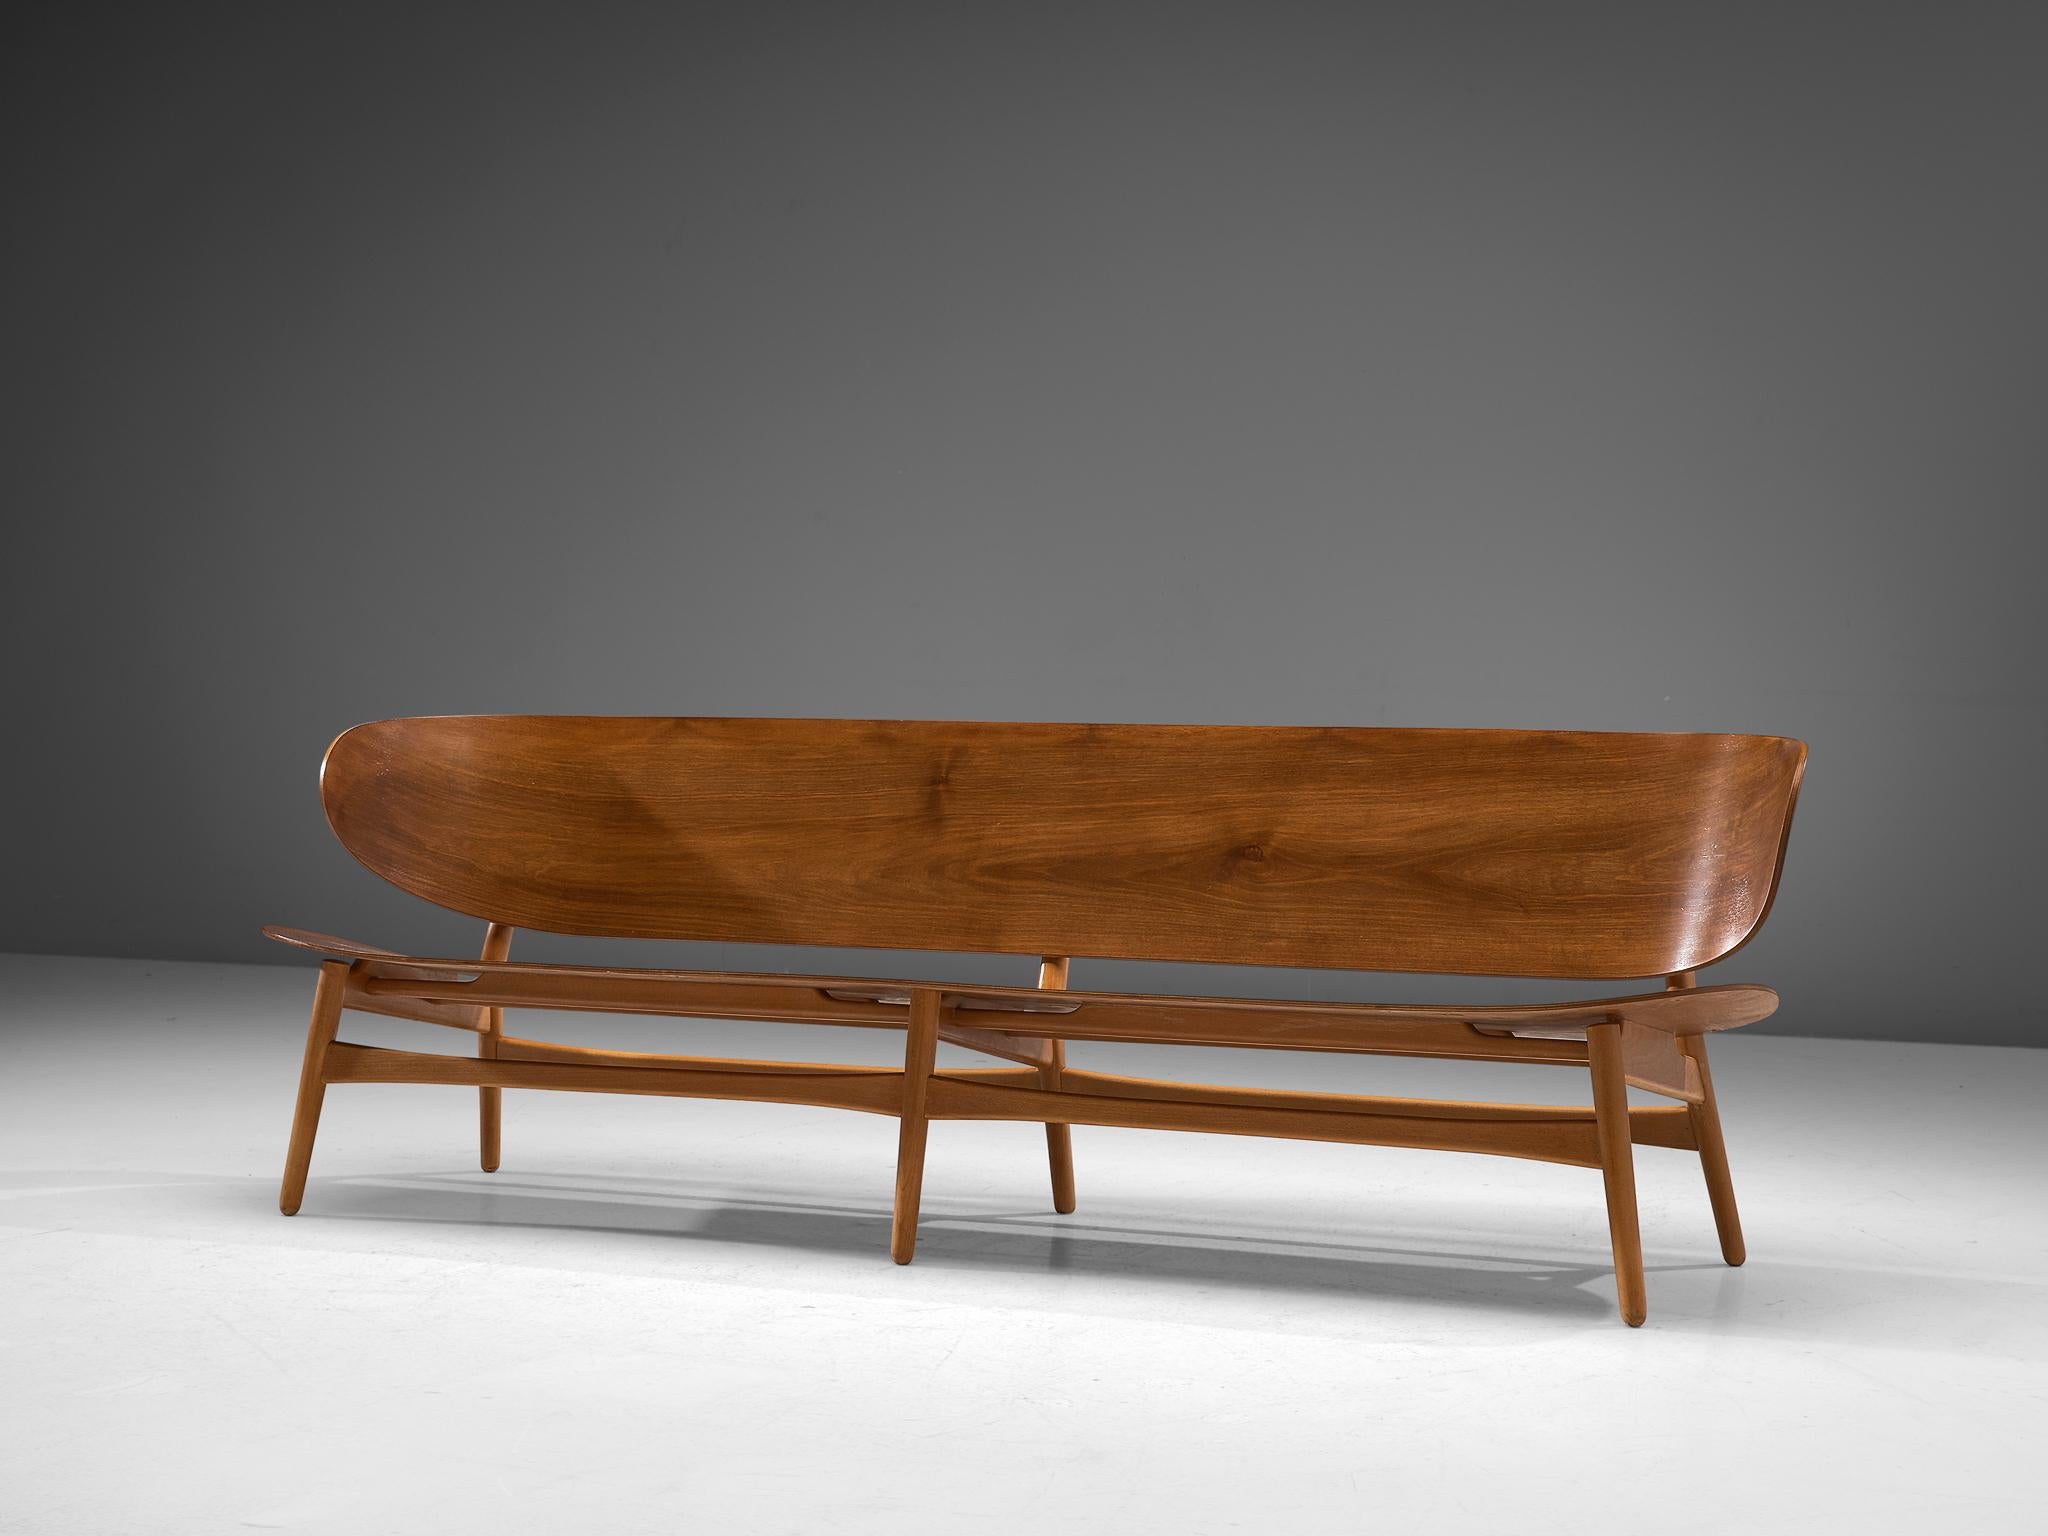 Hans J. Wegner for Fritz Hansen, FH 1935/4 bench, walnut, beech, Denmark, design 1948, manufactured 1950s

This is a rare and largest version ever made of the 'FH 1935' bench or sofa by Hans J. Wegner. This piece is one of the results of Wegner's